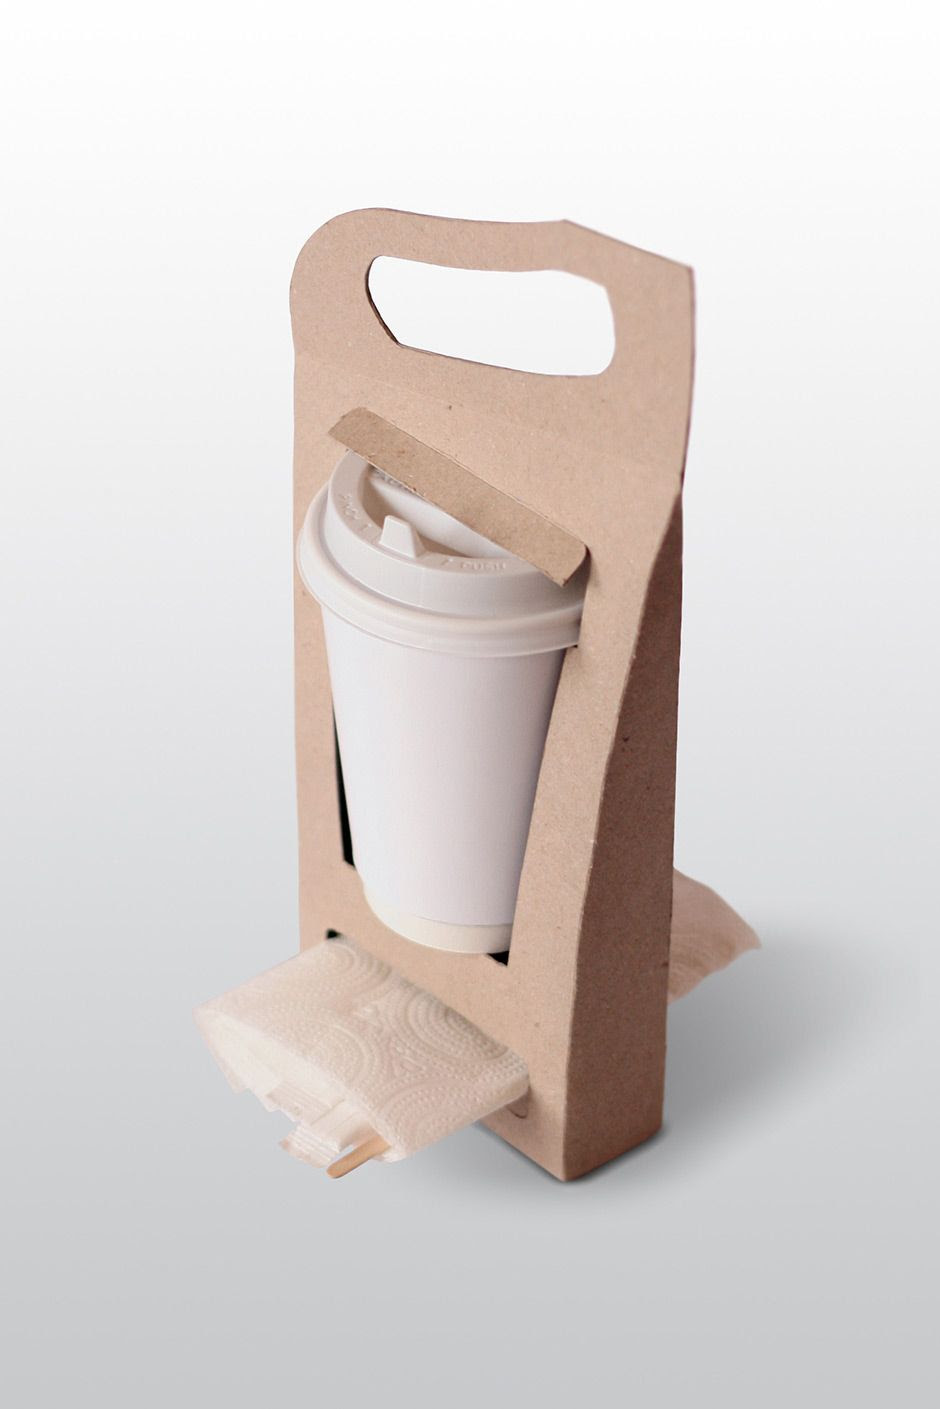 Download 140+ Paper Cup Carrier Mockup Yellowimages